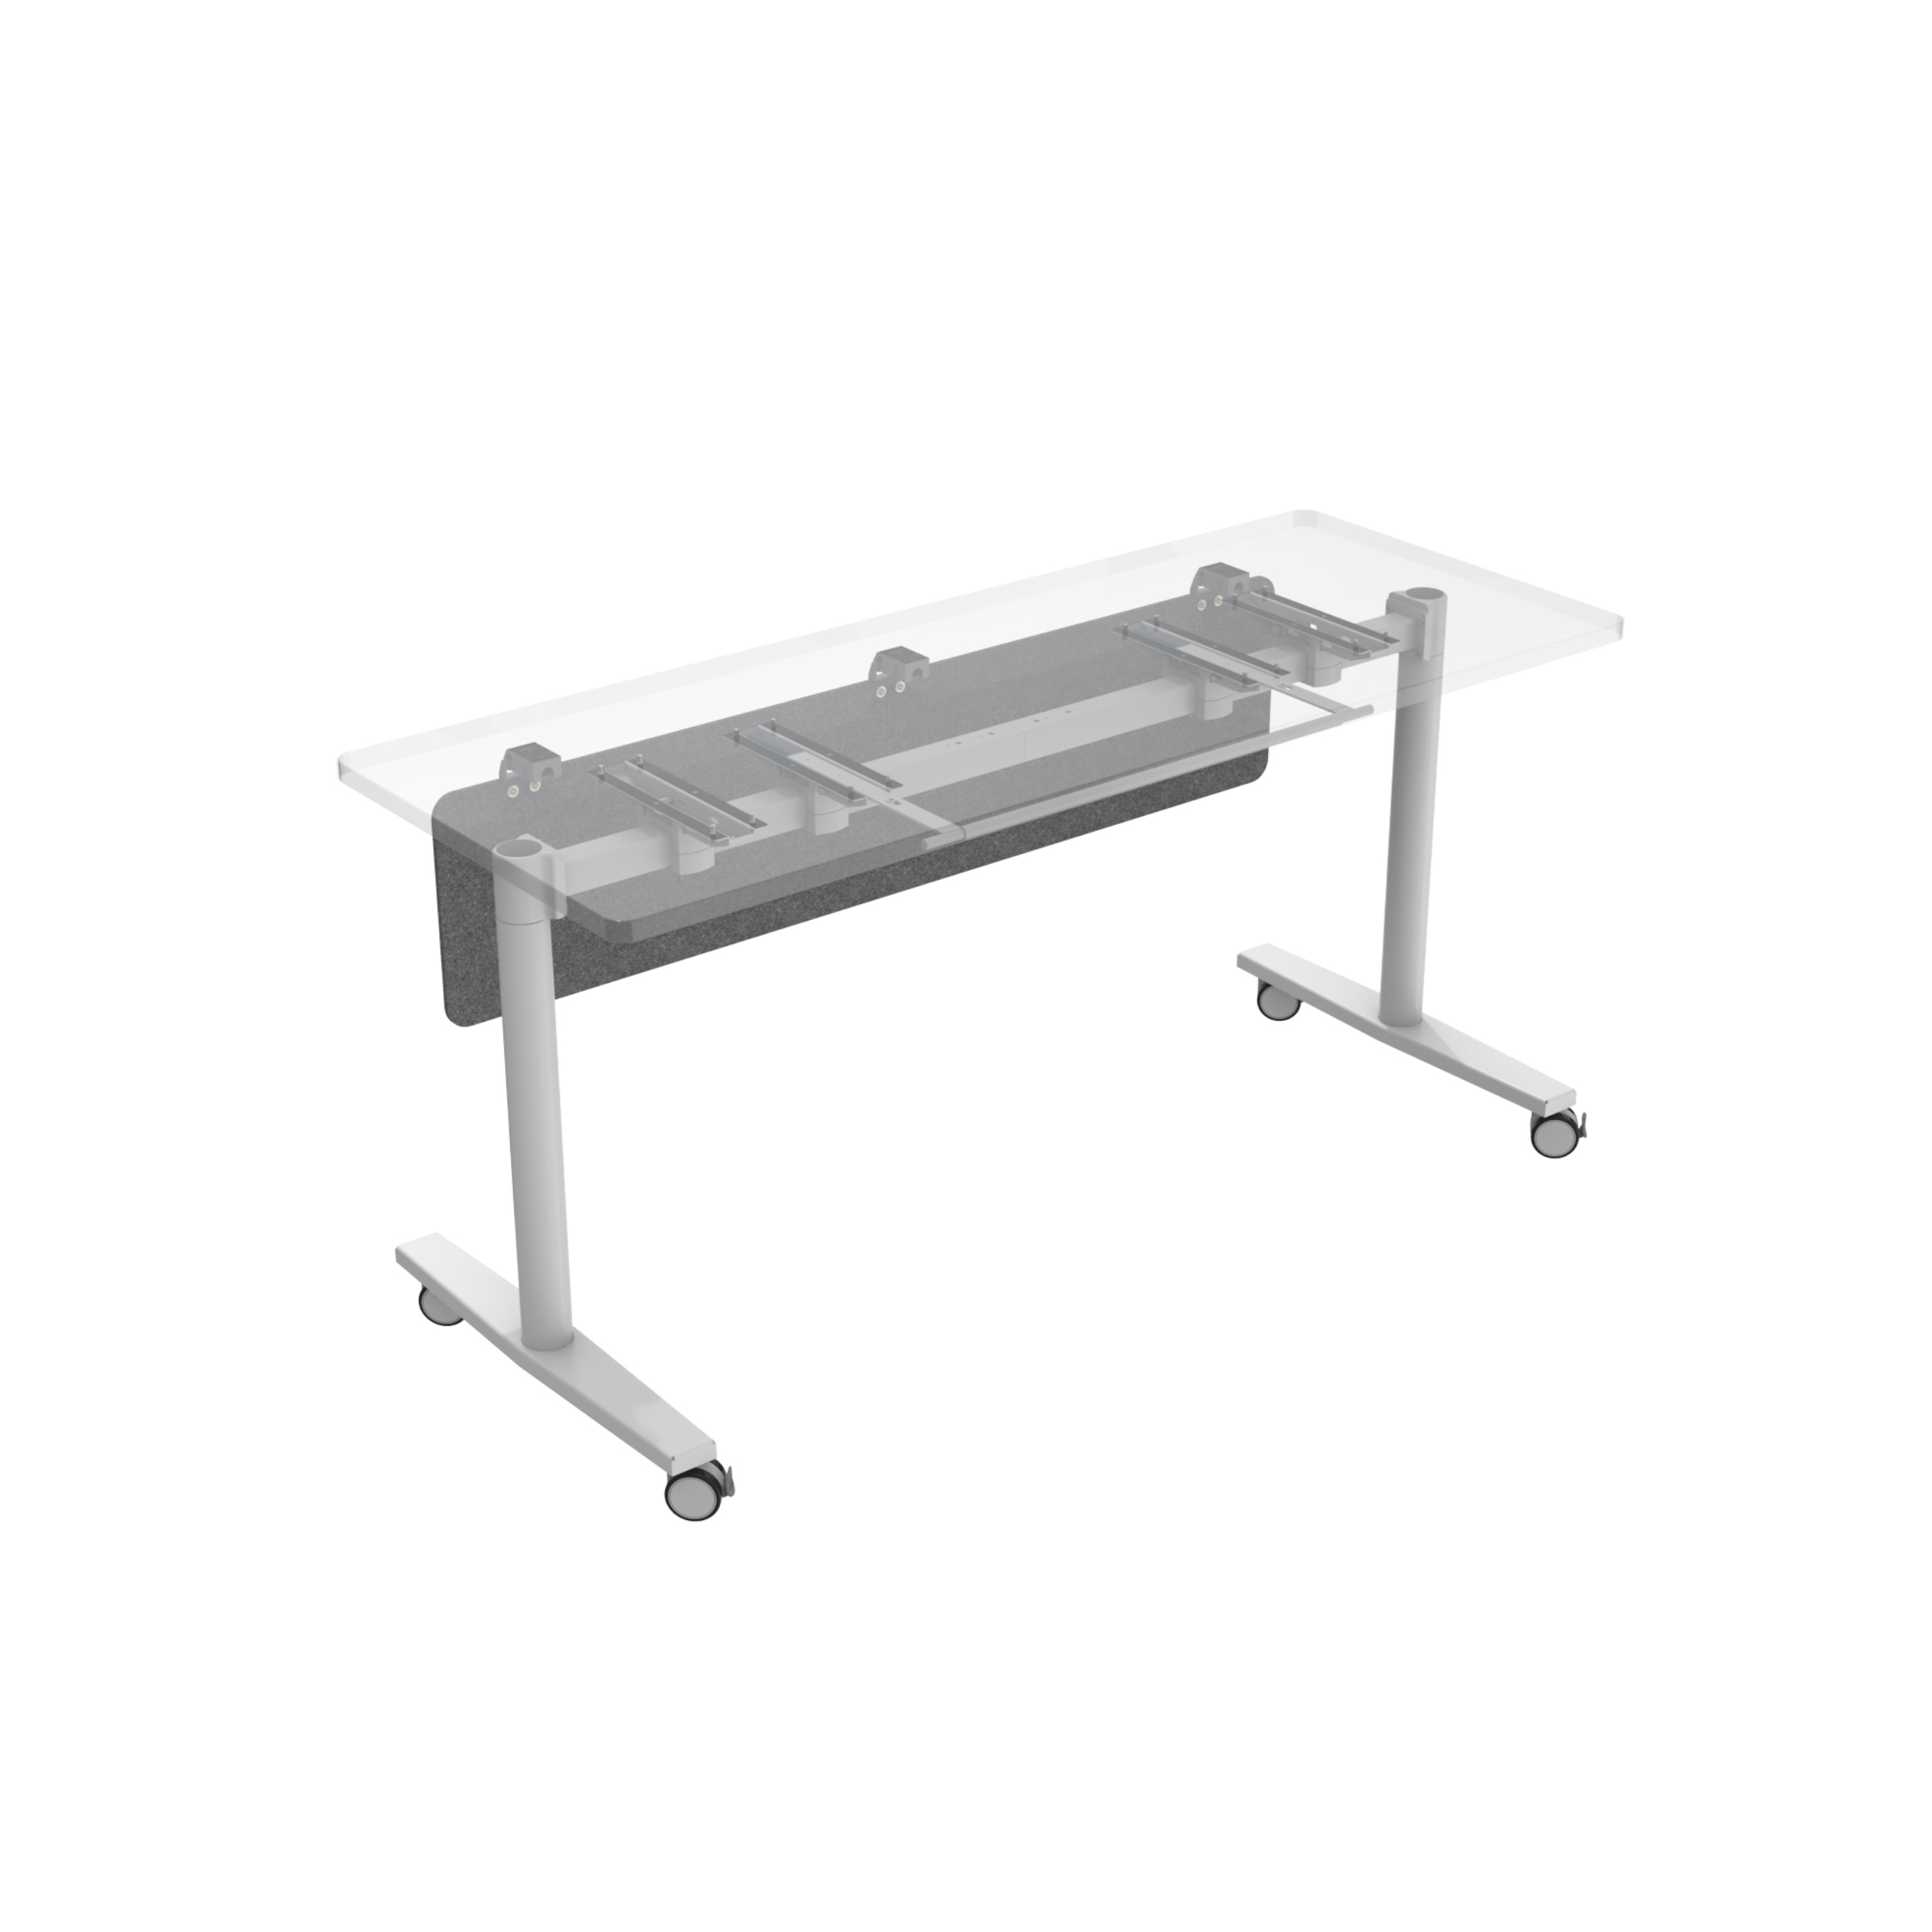 Modern Extended Beam Round Leg Flip Top Table for School Use